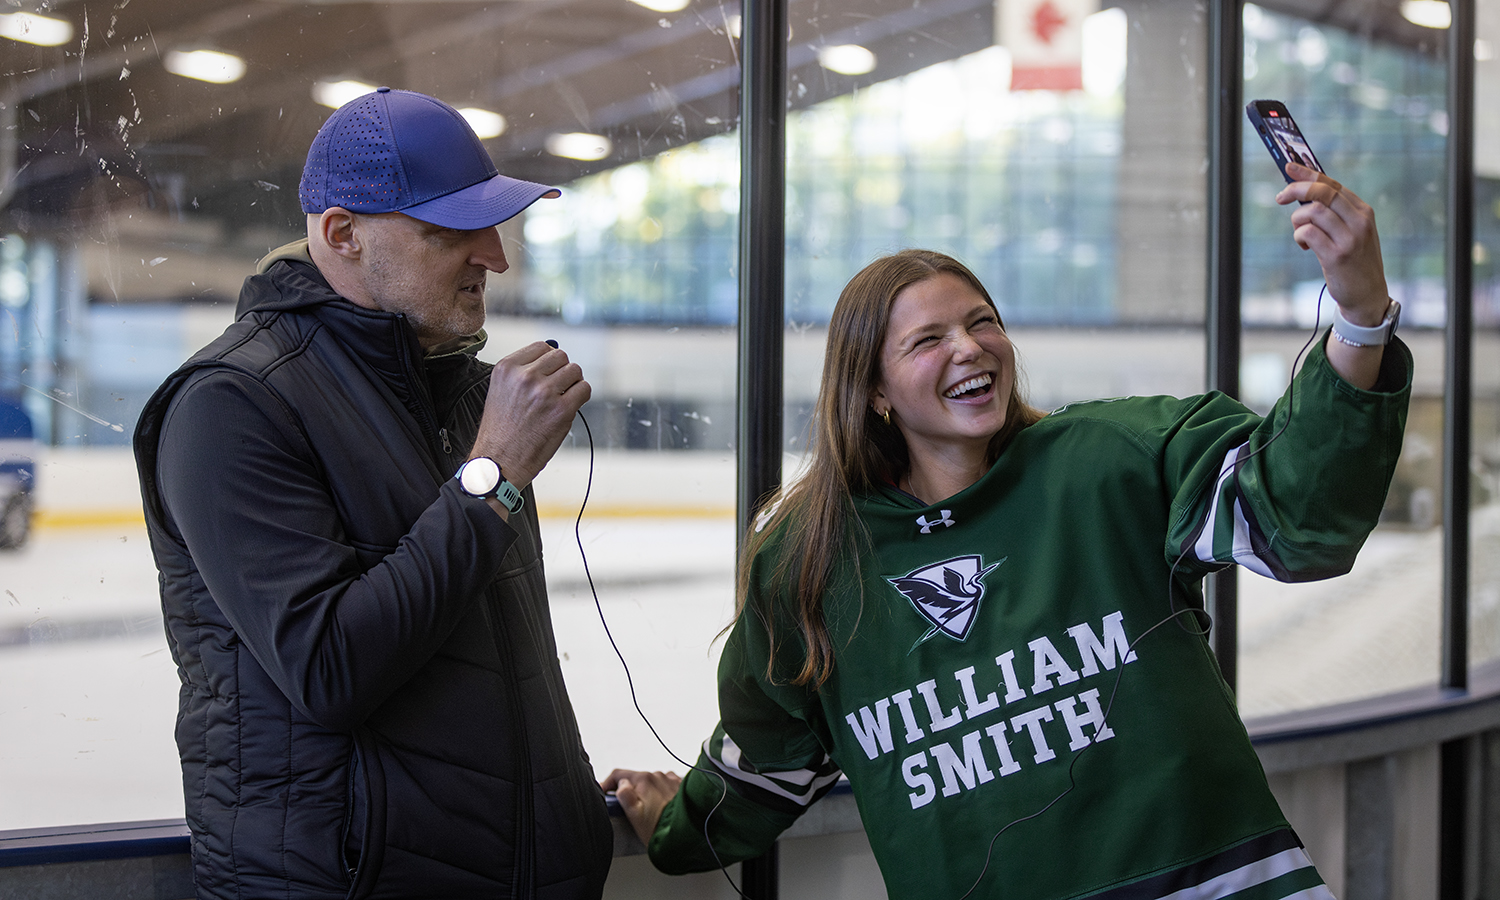 Kayla Ketchabaw ’25 interviews William Smith Ice Hockey Head Coach Matthew Cunningham for a TikTok interview during the Heron’s Media Day.